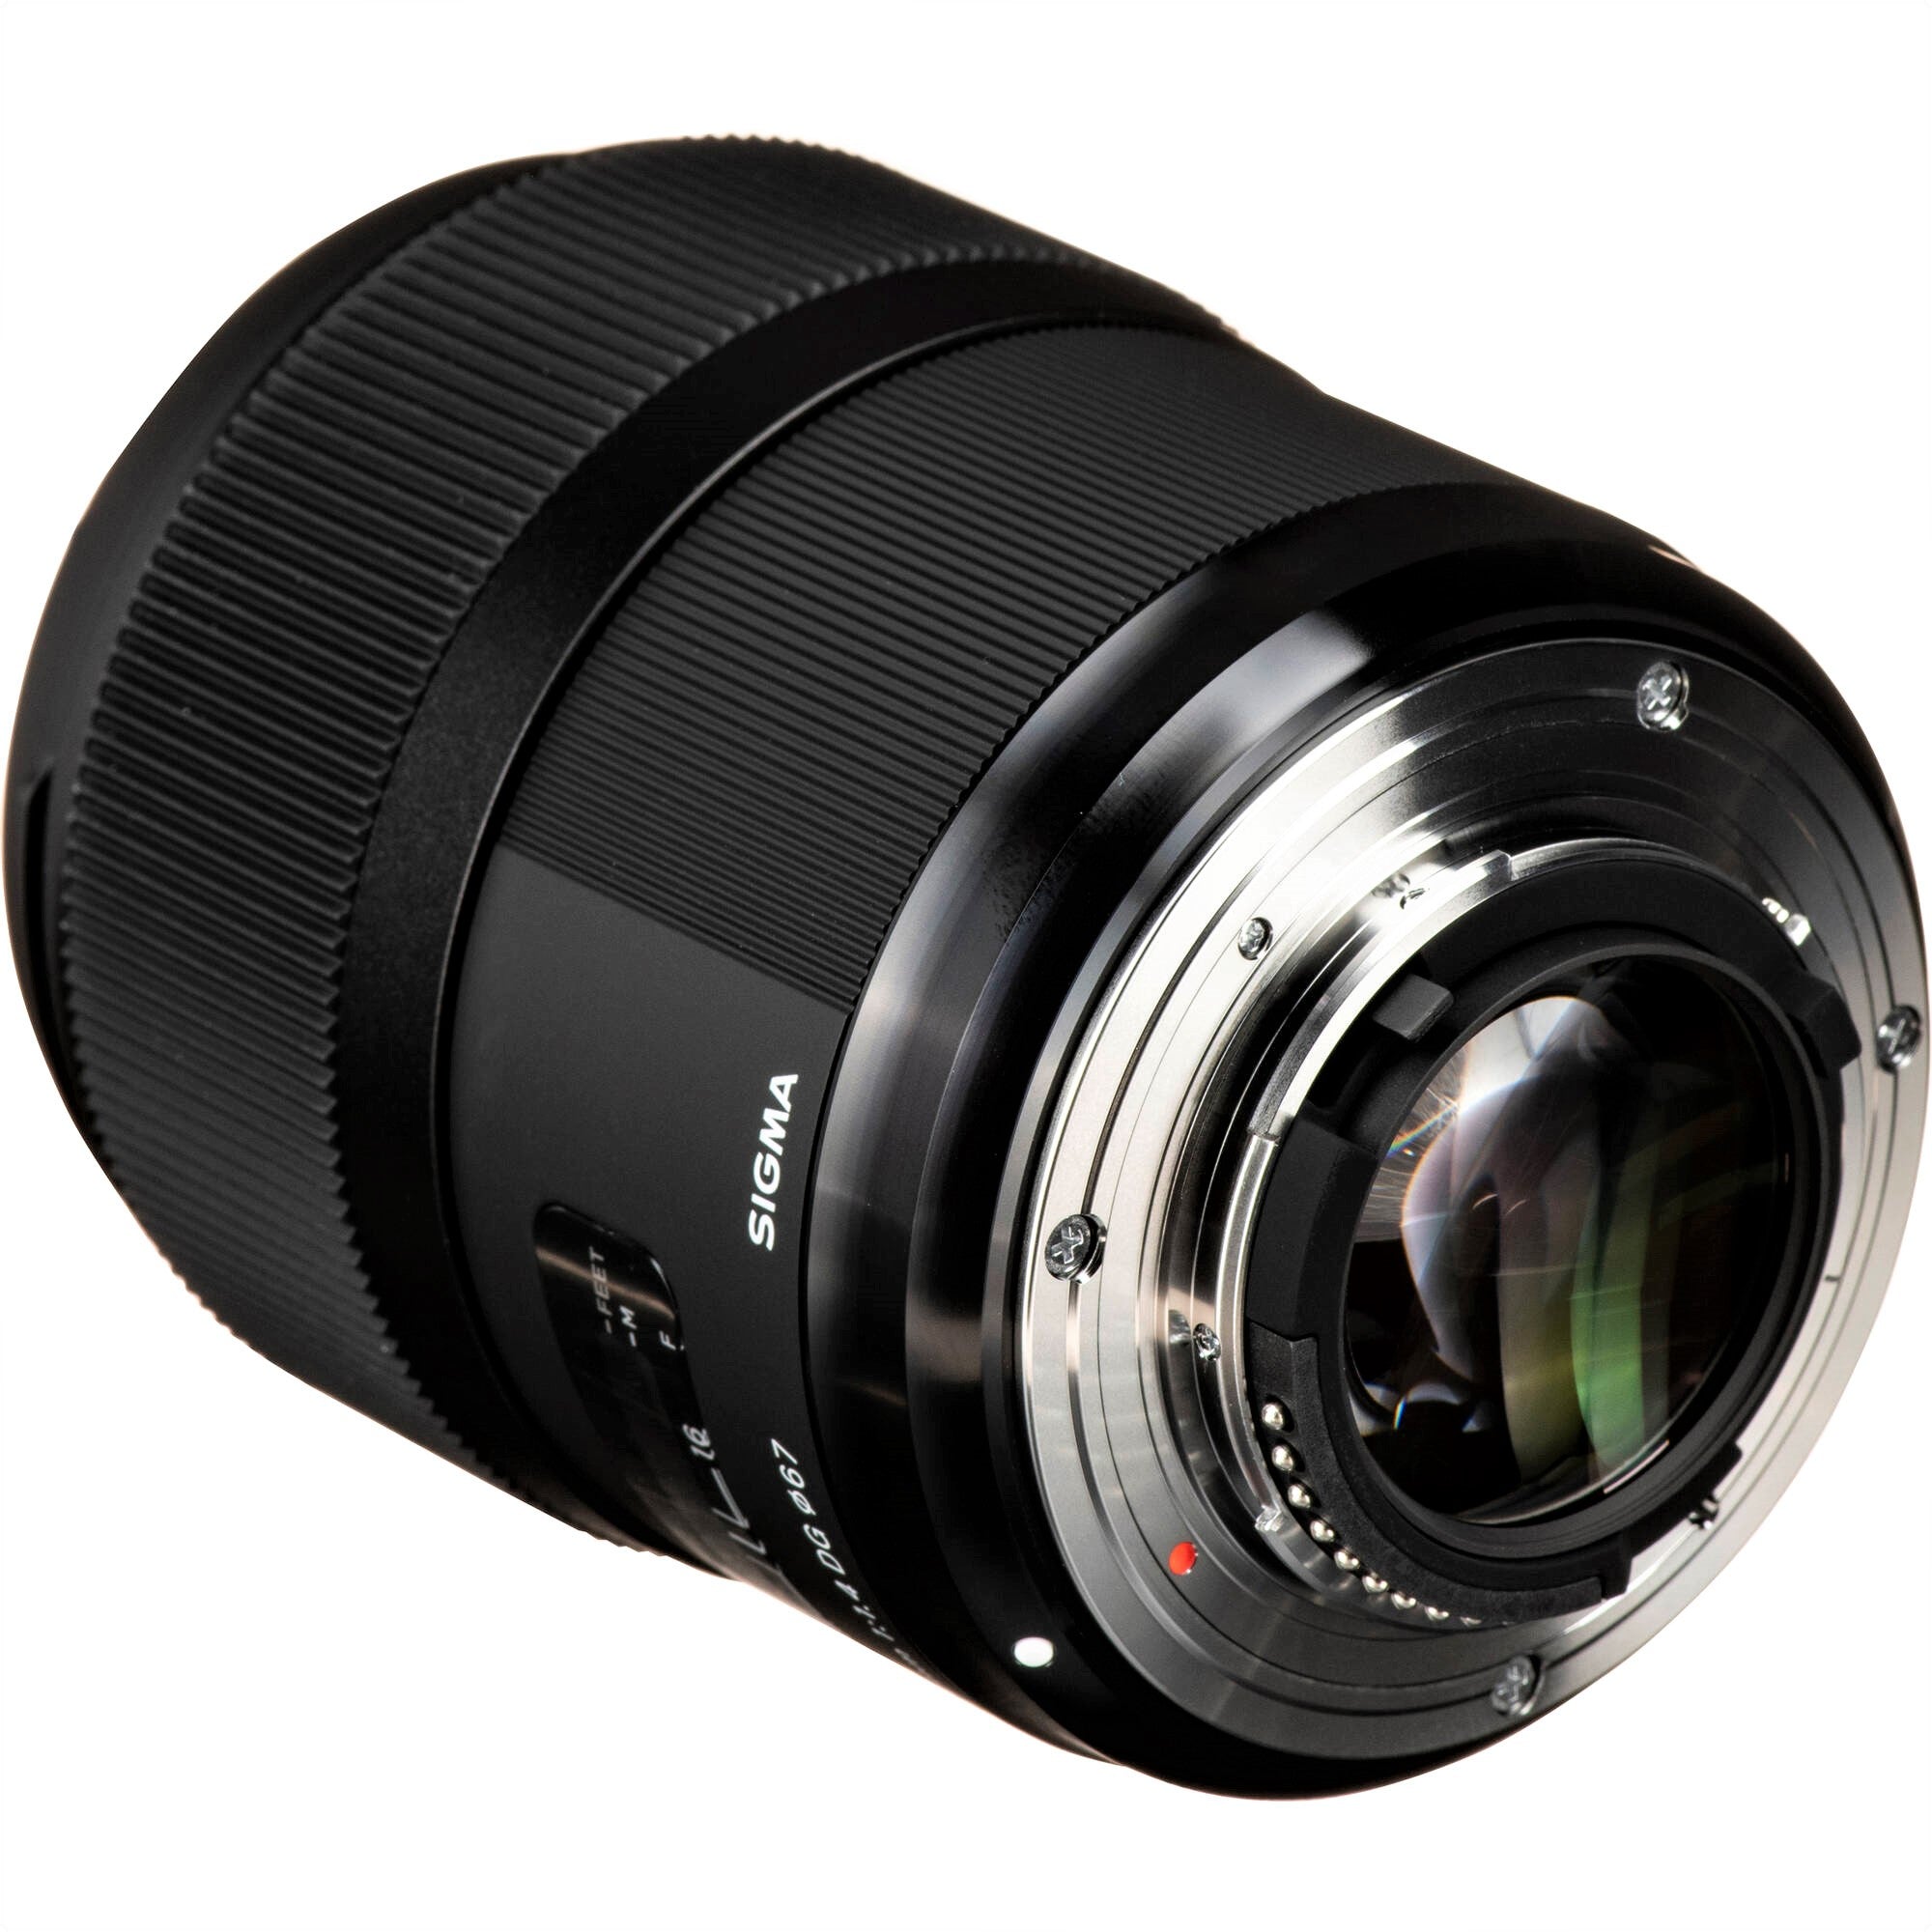 Sigma 35mm F1.4 DG HSM Art Lens for Nikon F in a Back-Side View